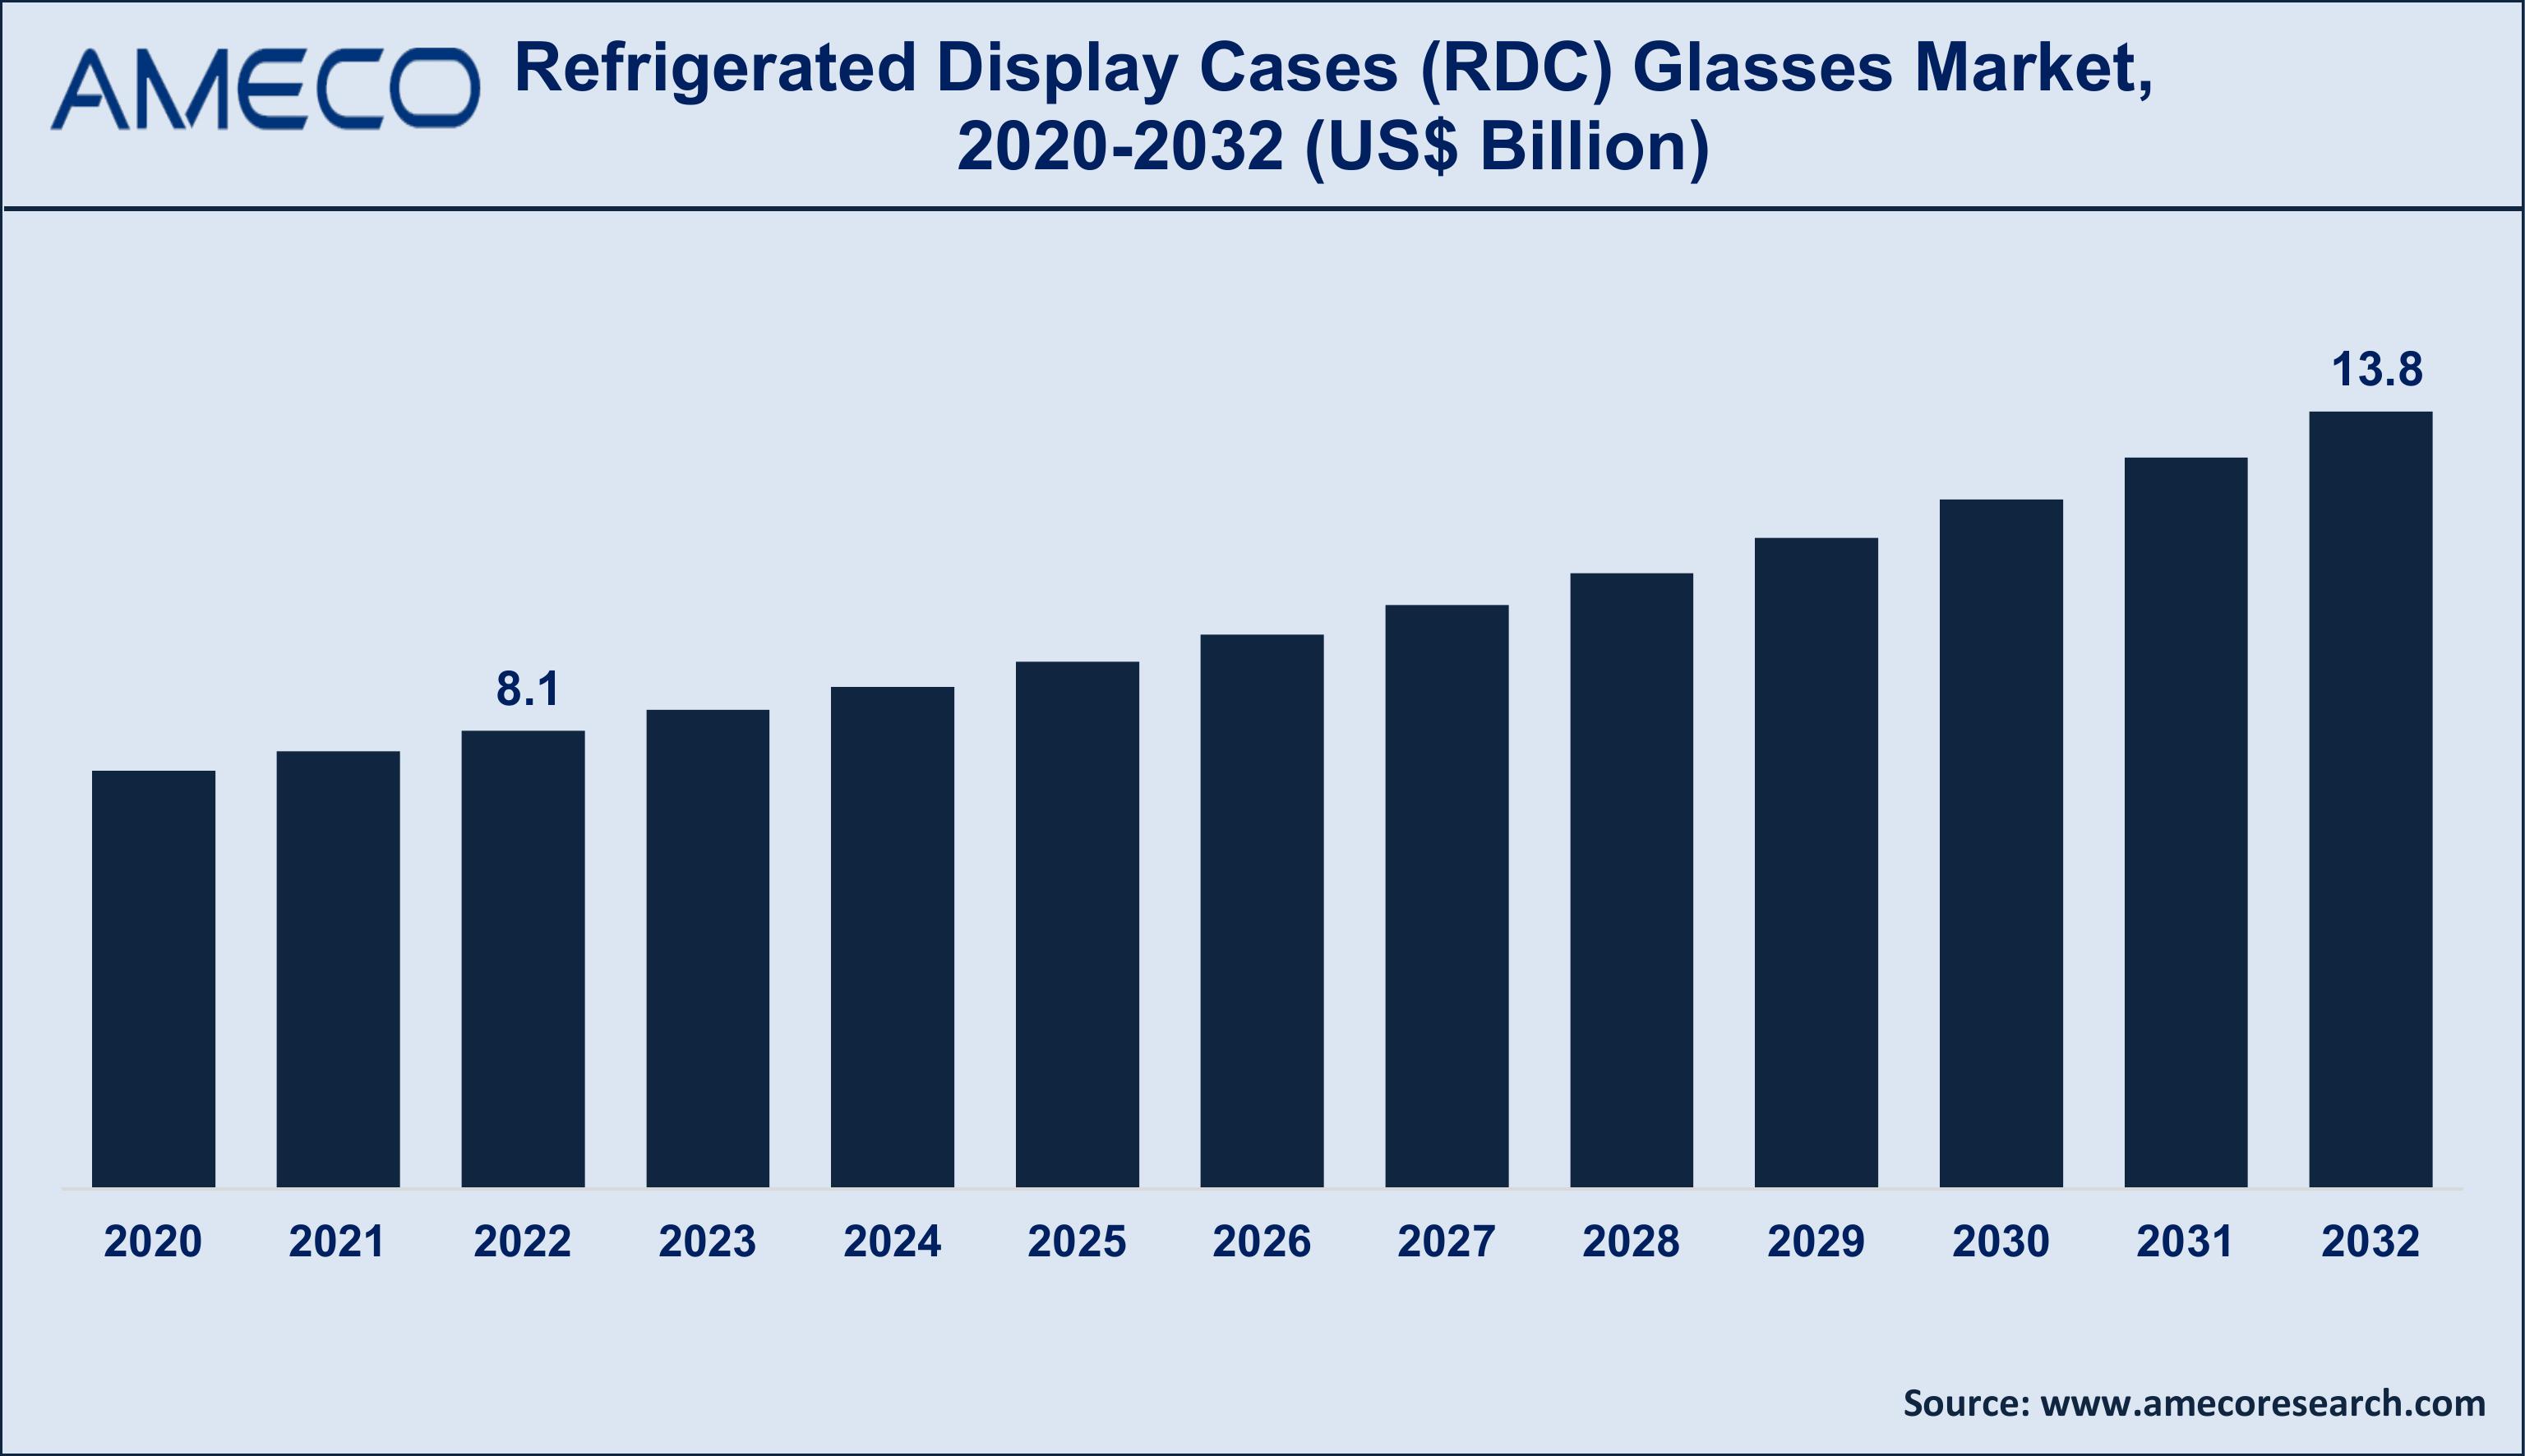 Refrigerated Display Cases (RDC) Glasses Market Size